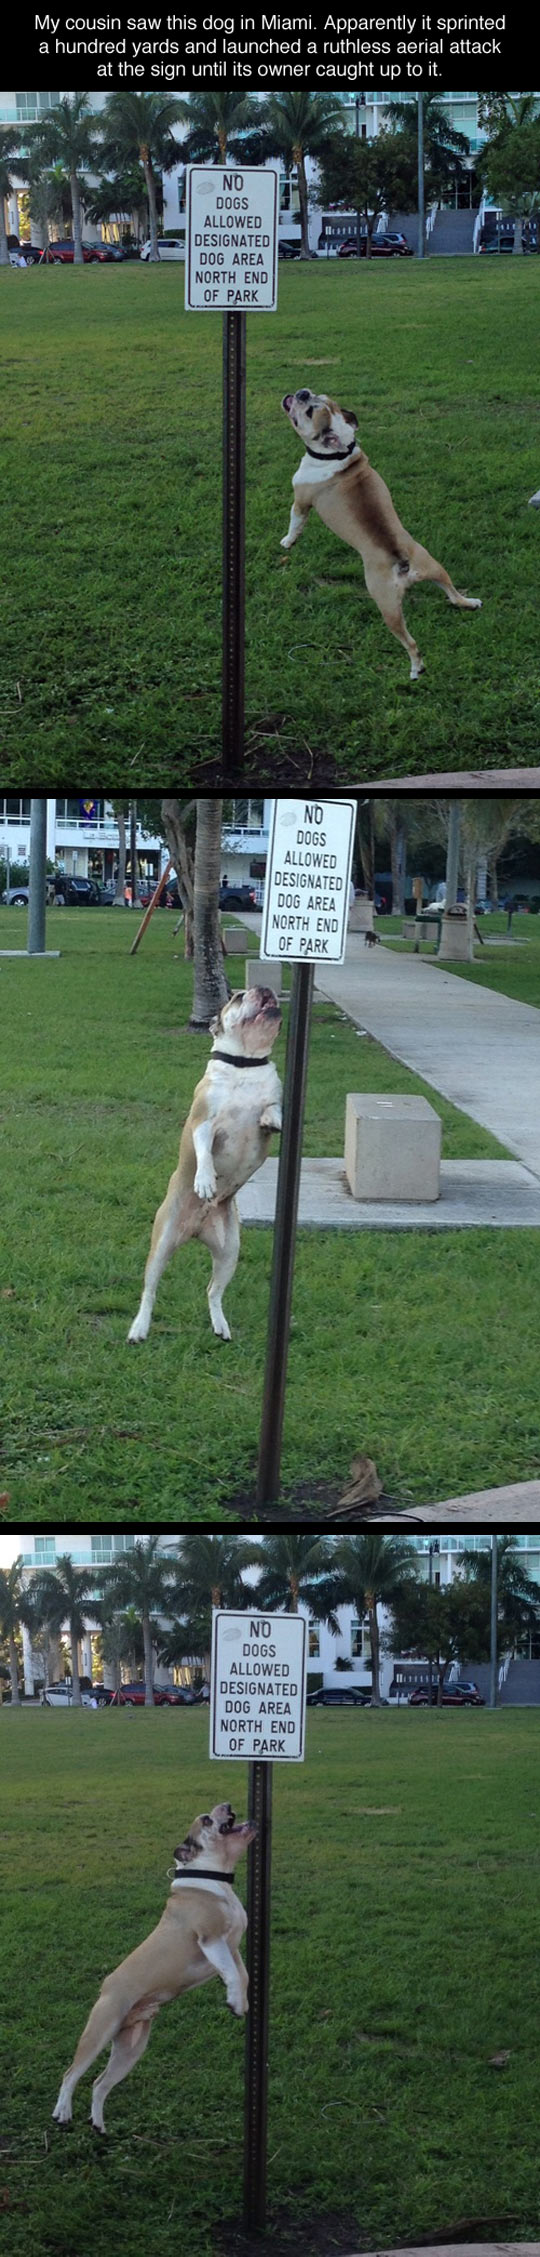 No Dogs You Say?